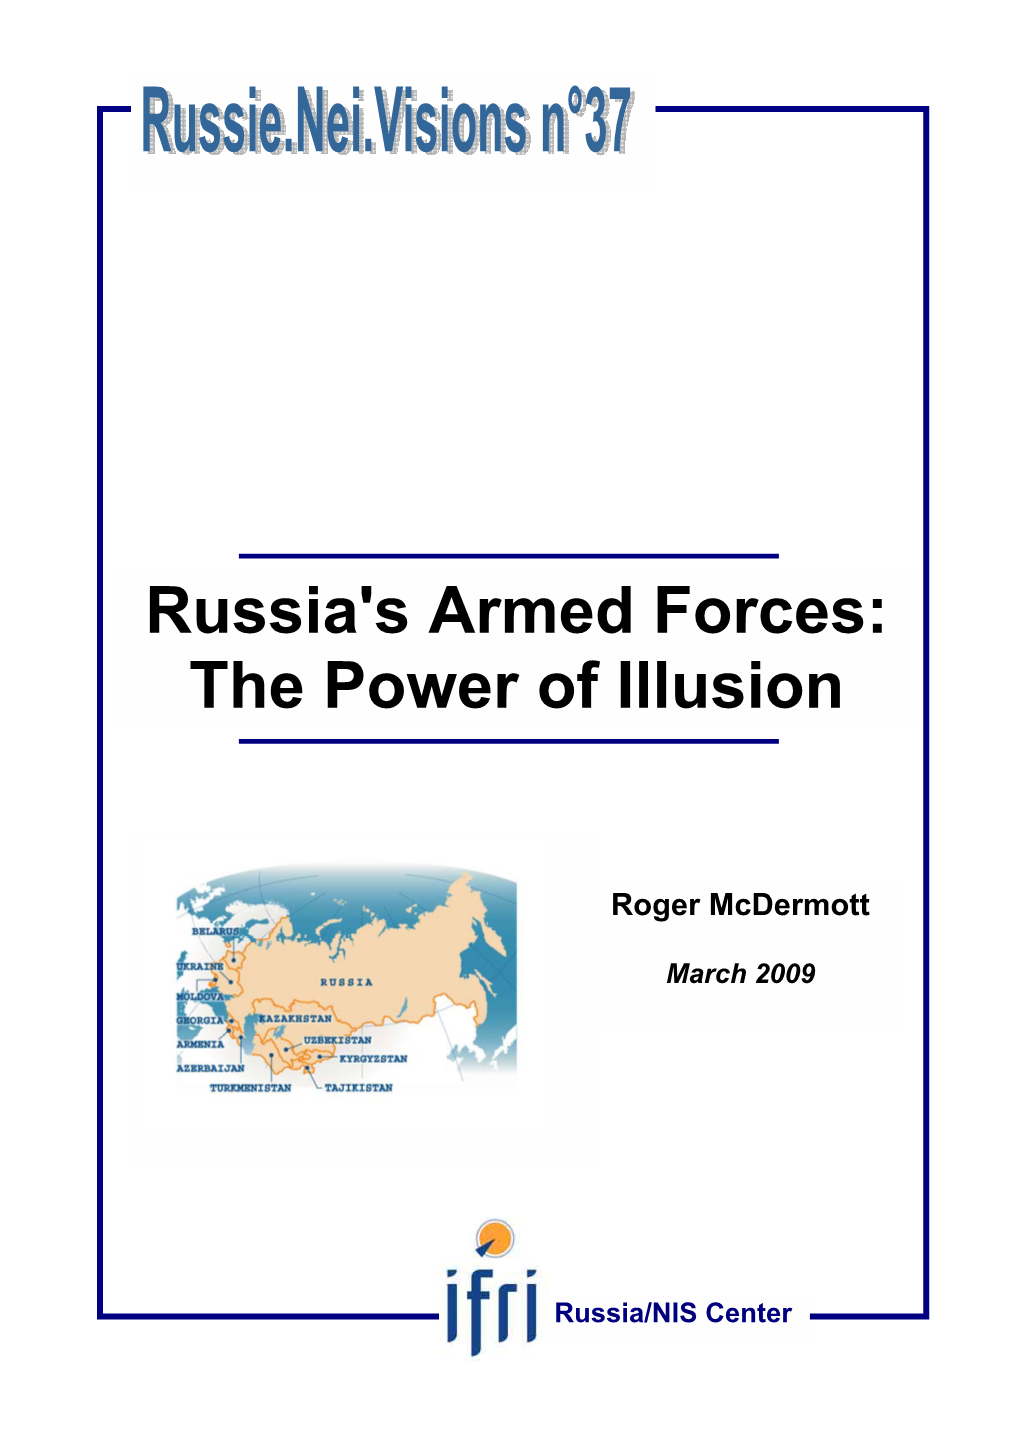 Russia's Armed Forces: the Power of Illusion